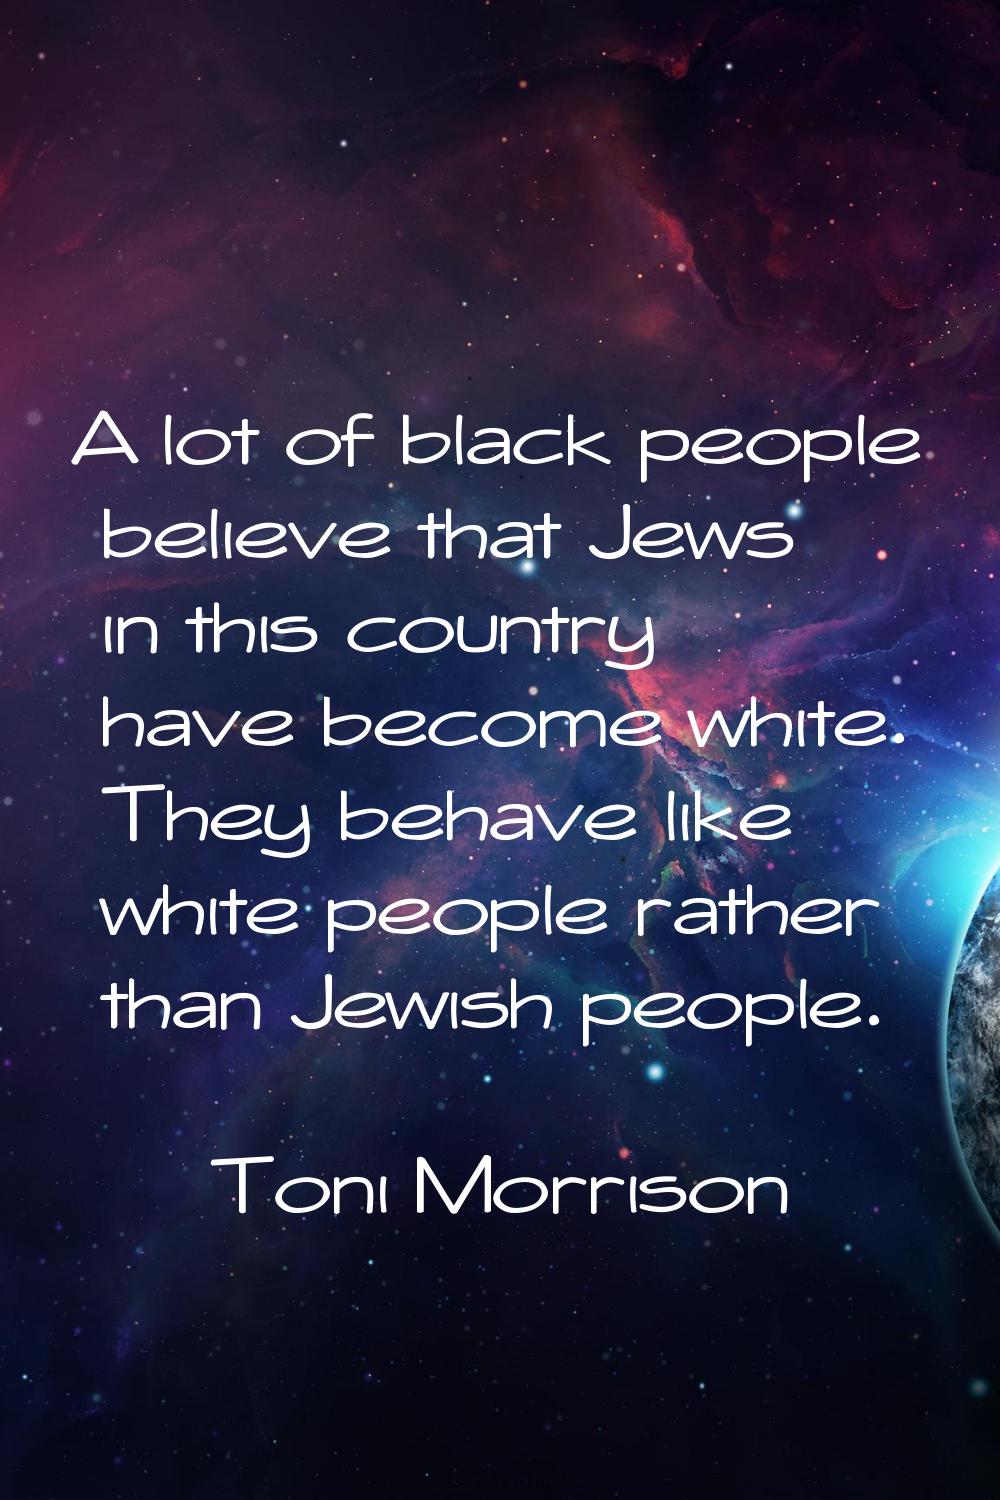 A lot of black people believe that Jews in this country have become white. They behave like white p